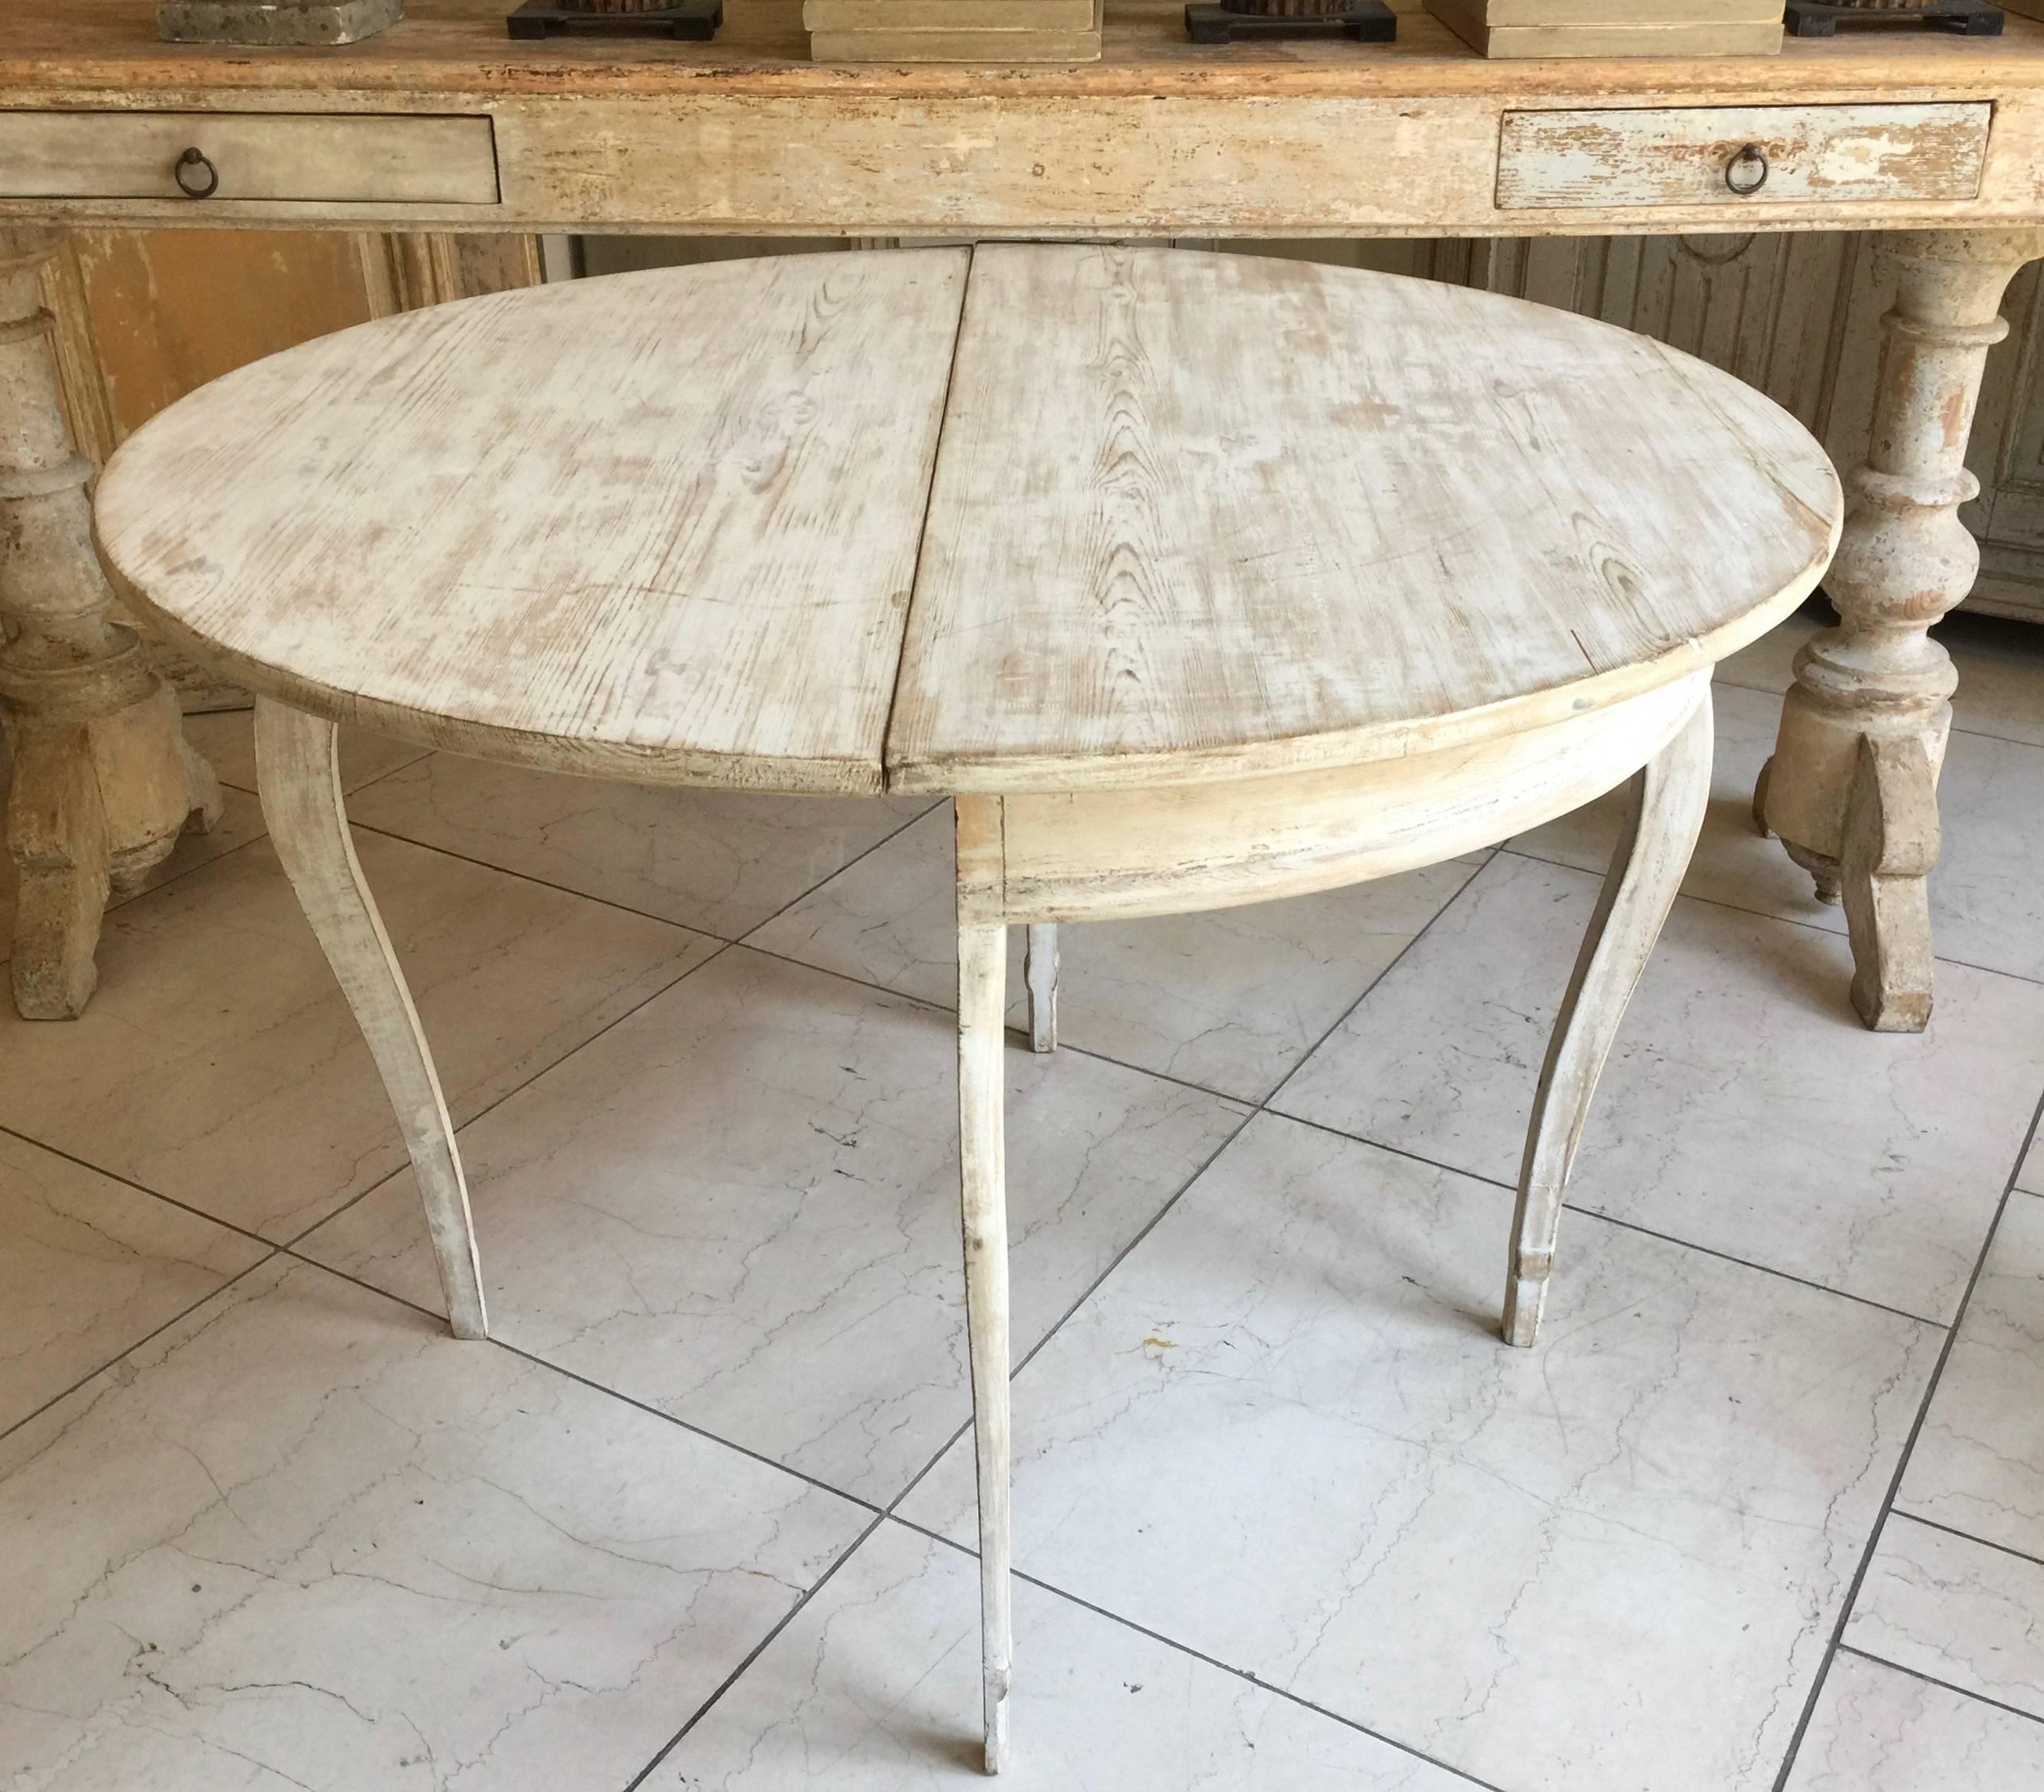 Swedish Demilune folding table with delicate cabriole legs in Rococo style and layers of paints scraped to original color,
Sweden, circa 1850.
Diameter together 41”.
Surprising pieces and objects, authentic, decorative and rare items. Discover